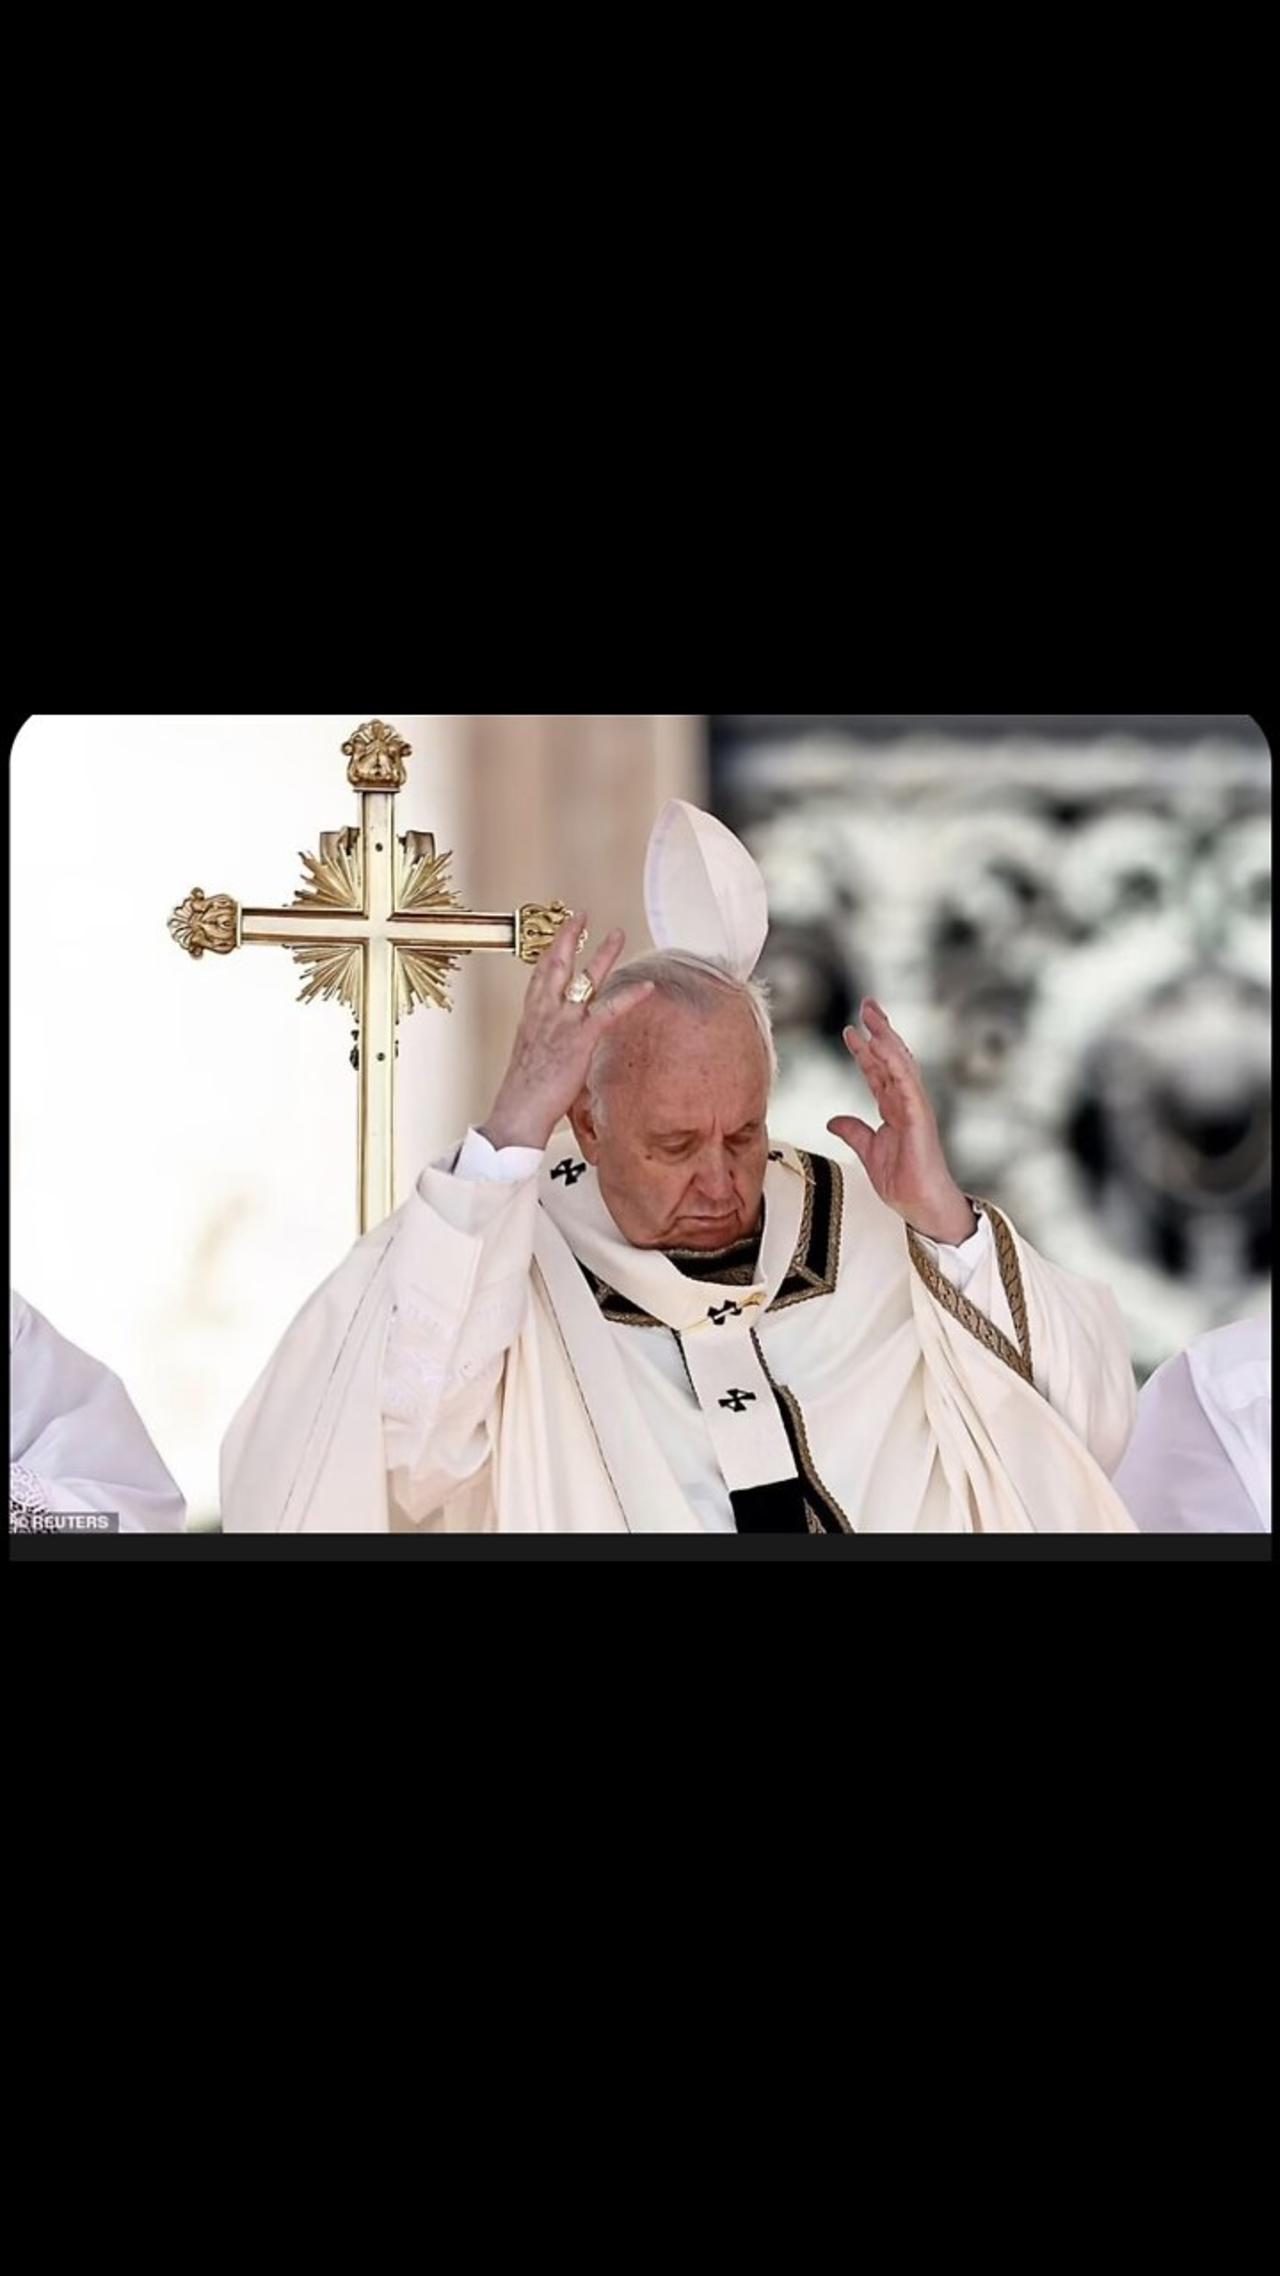 POPE'S COVER BLOWN!  DEEP STATE COVID AND OTHER FAILED PLANS!  JESUS IS ALIVE!  NEWS PEACE 4-18-22